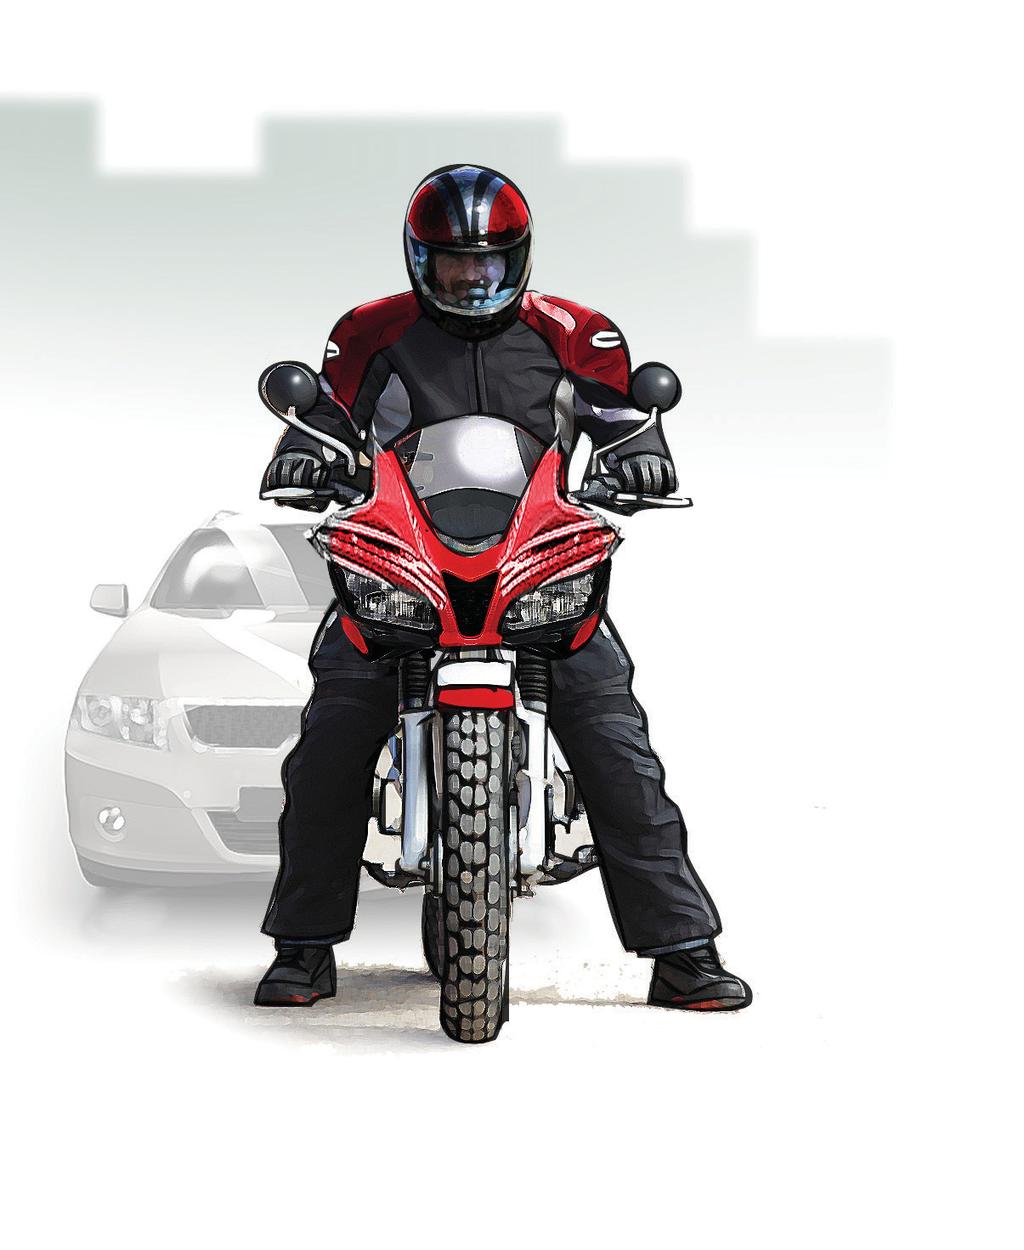 Move the motorcycle off its stand, and be sure that the stand is secure and in an upright position.